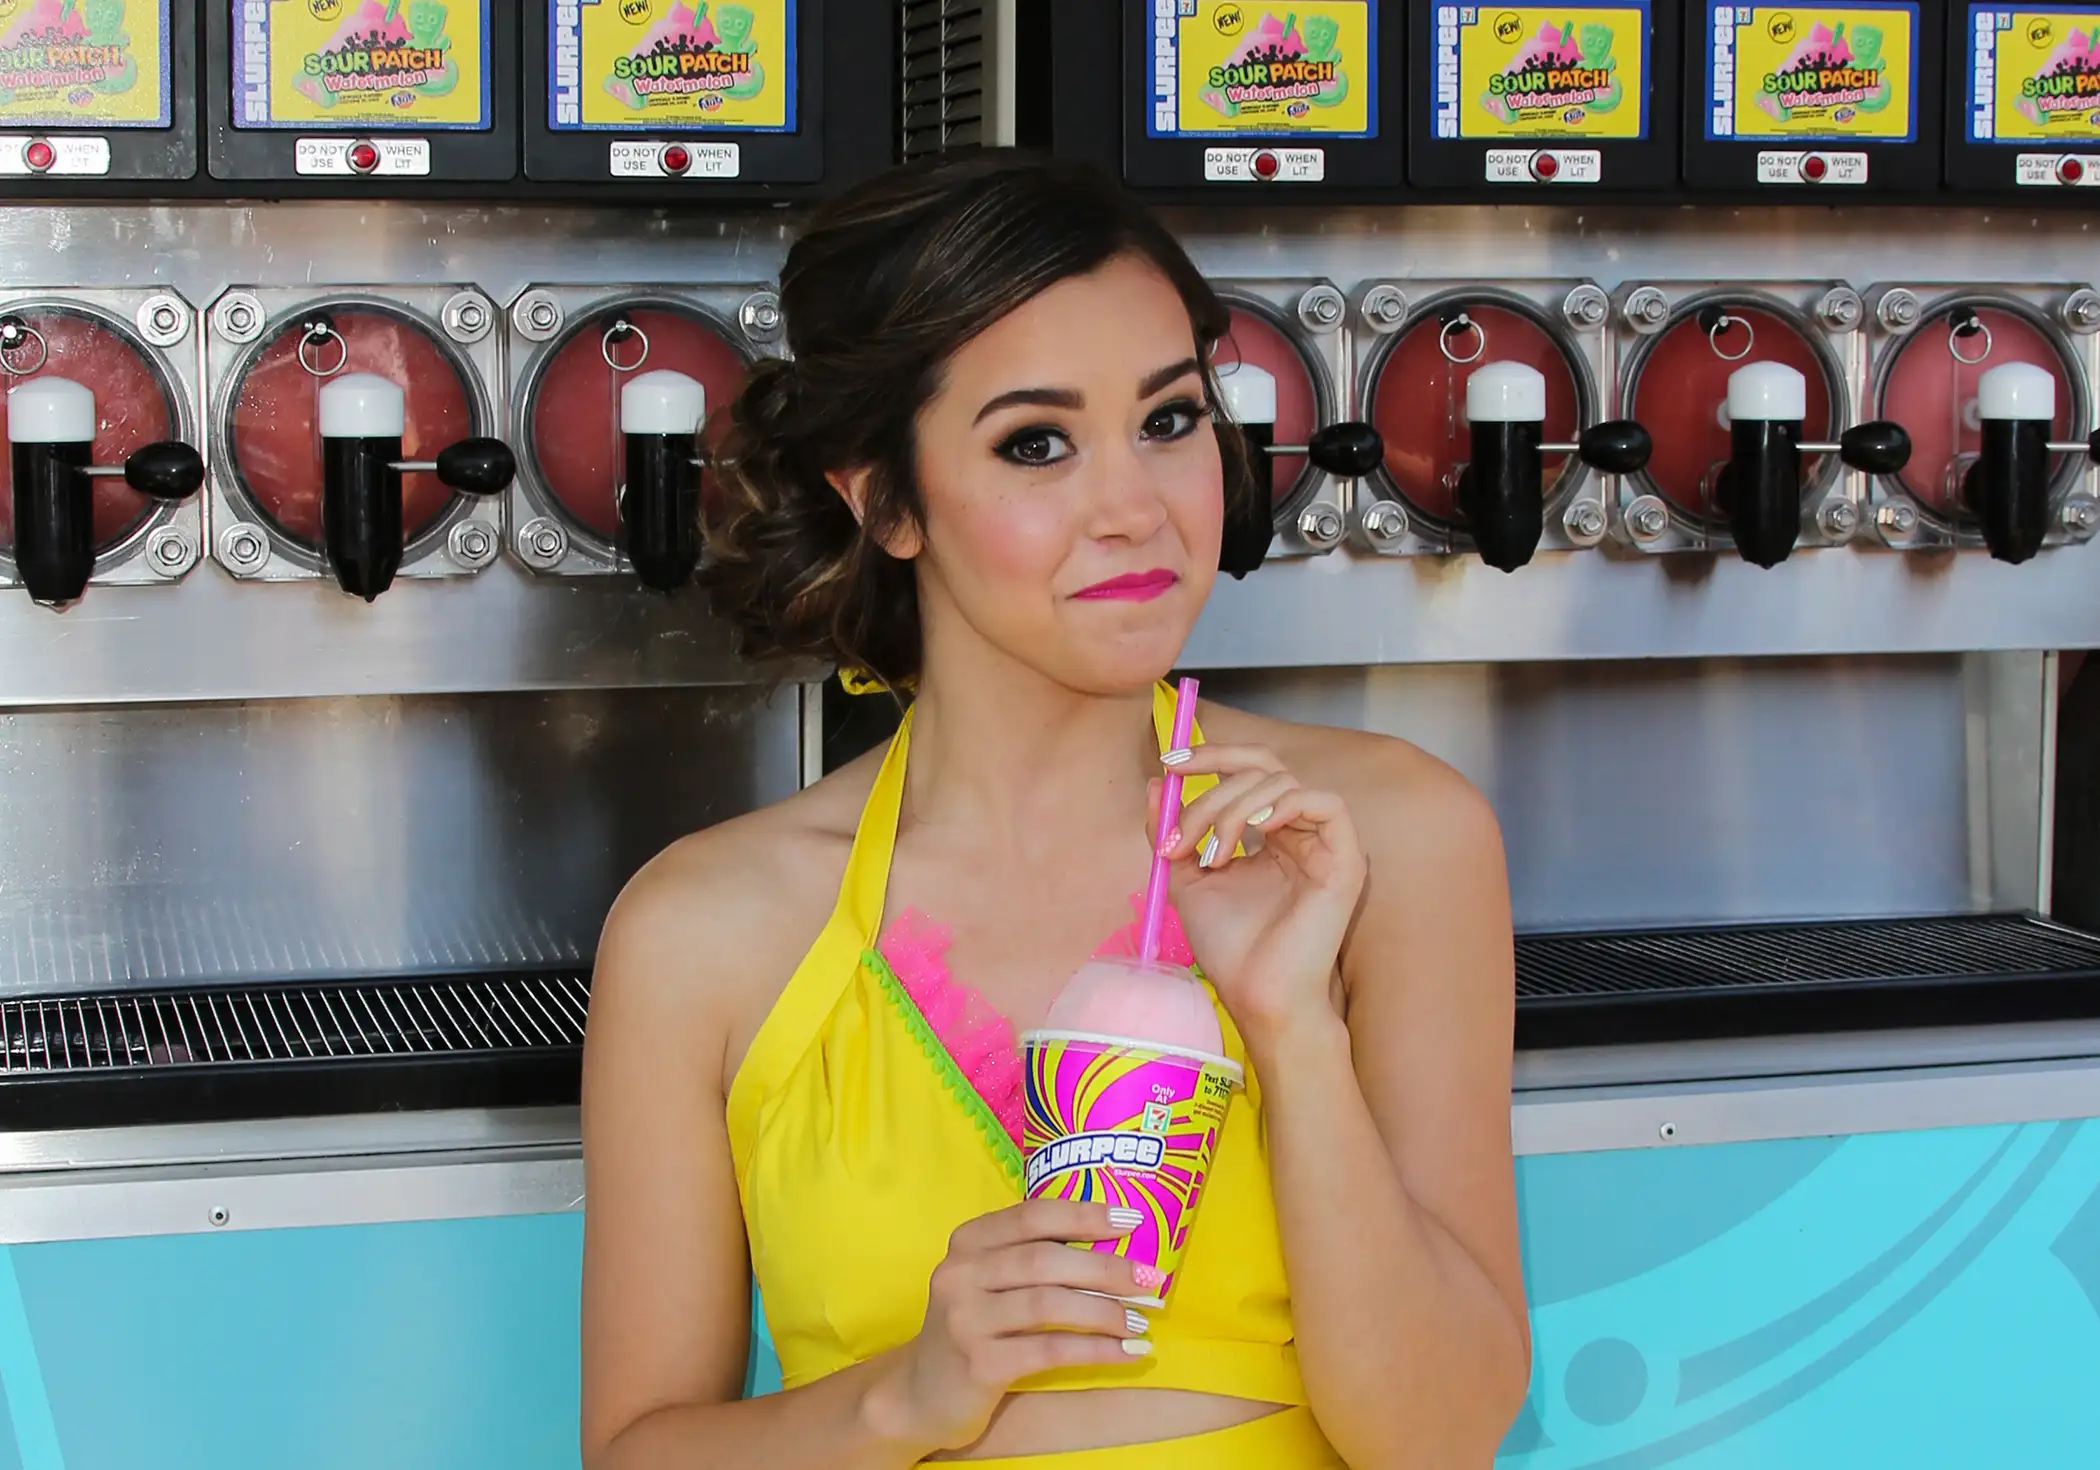 Singer Megan Nicole attends the event to celebrate 7-Eleven Slurpee Day at 7-Eleven on July 10, 2015 in Burbank, California.